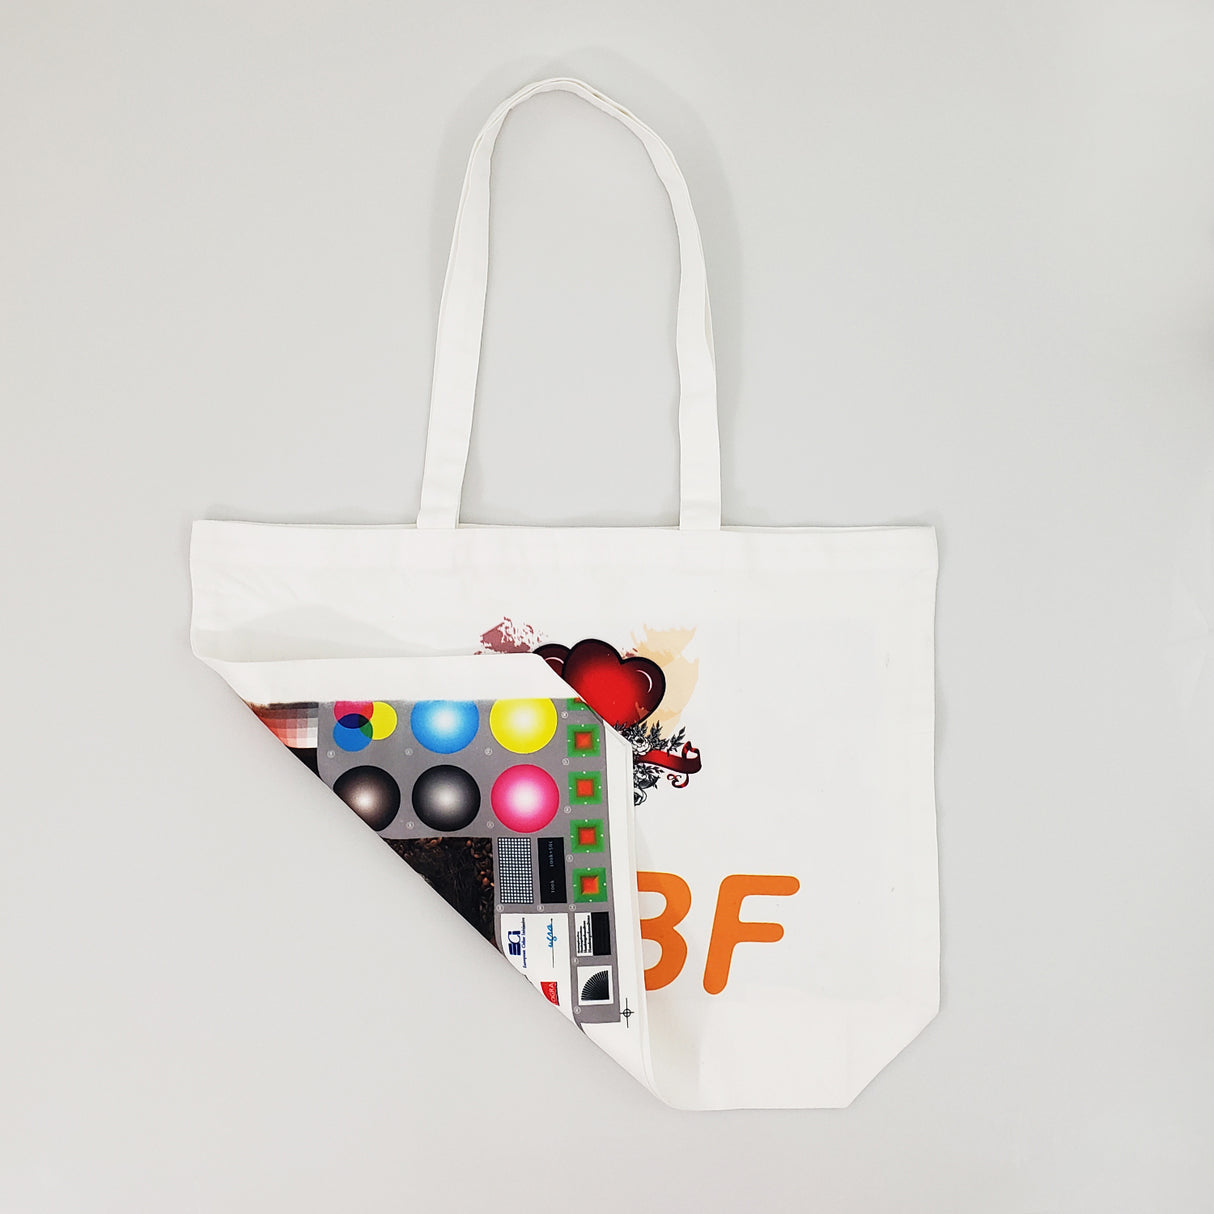 Large 100% Polyester Canvas Sublimation Tote Bags White - SB219